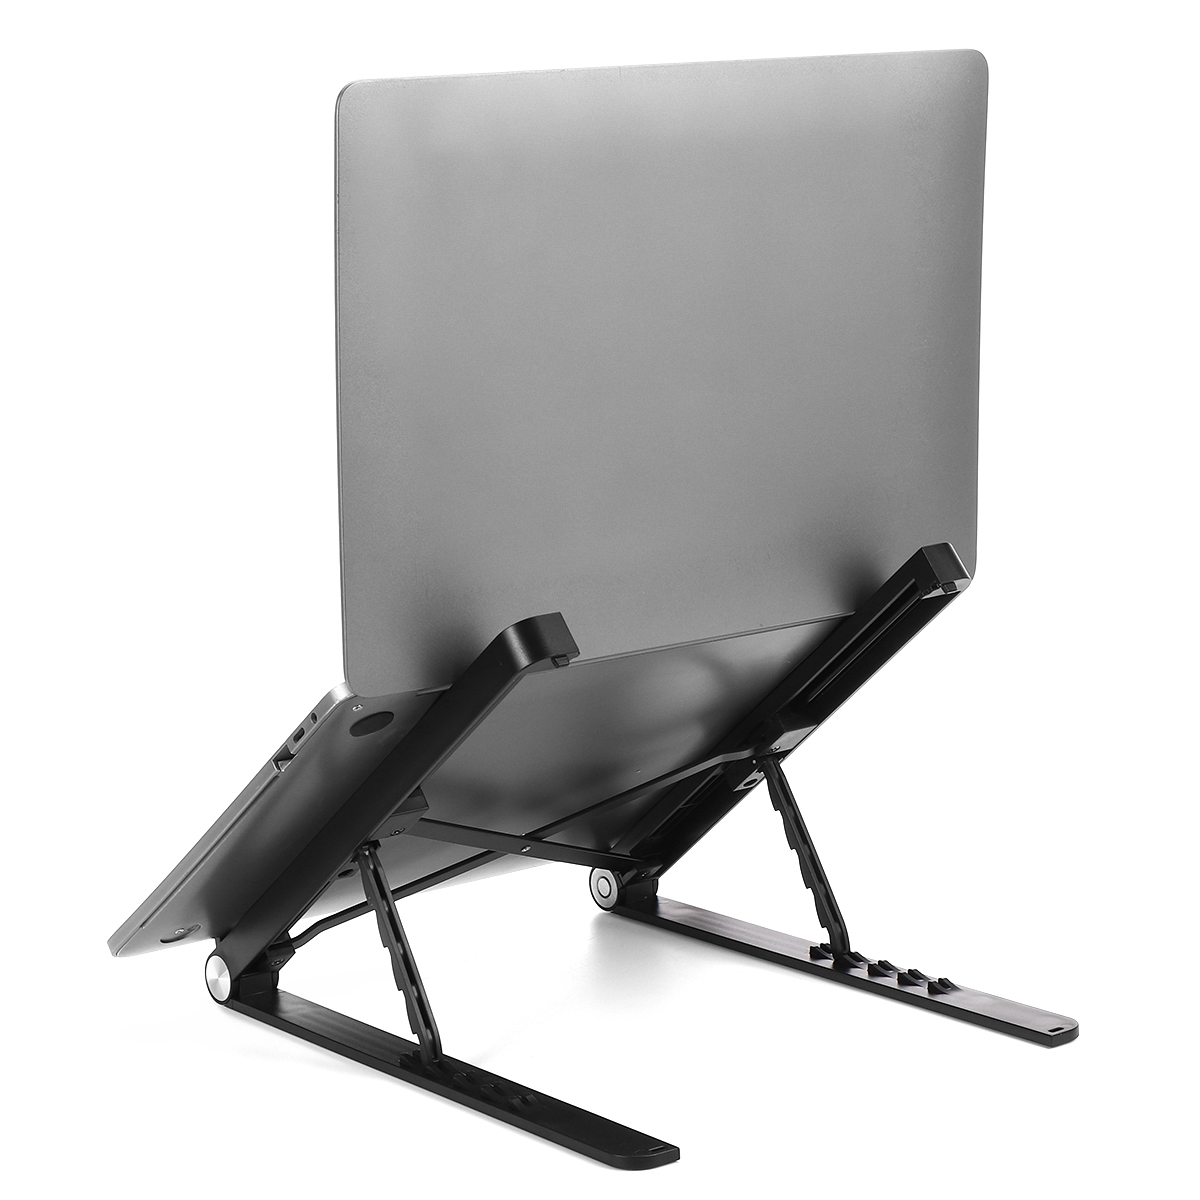 Foldable-5-Height-Adjustable-Laptop-Stand-Tablet-Stand-Heat-Dissipation-for-iPad-Macbook-below-17-in-1700967-11